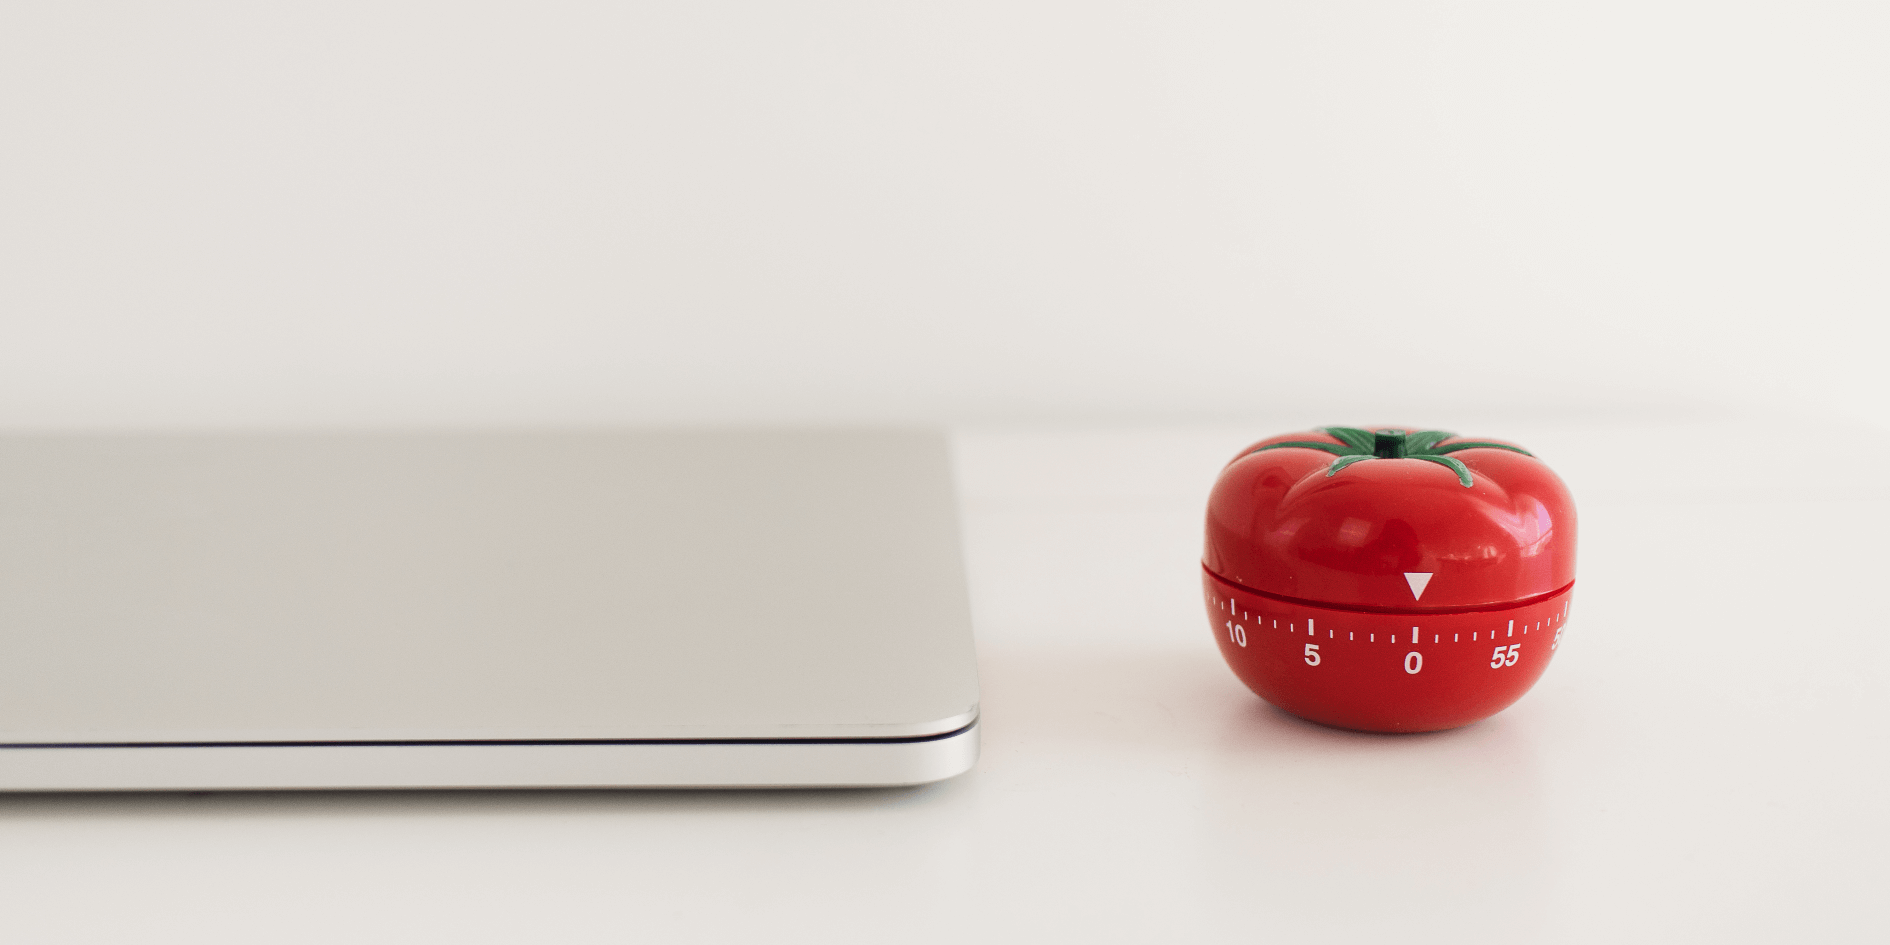 Try One Of These 5 Pomodoro Timer Apps To Help You Stay Focused